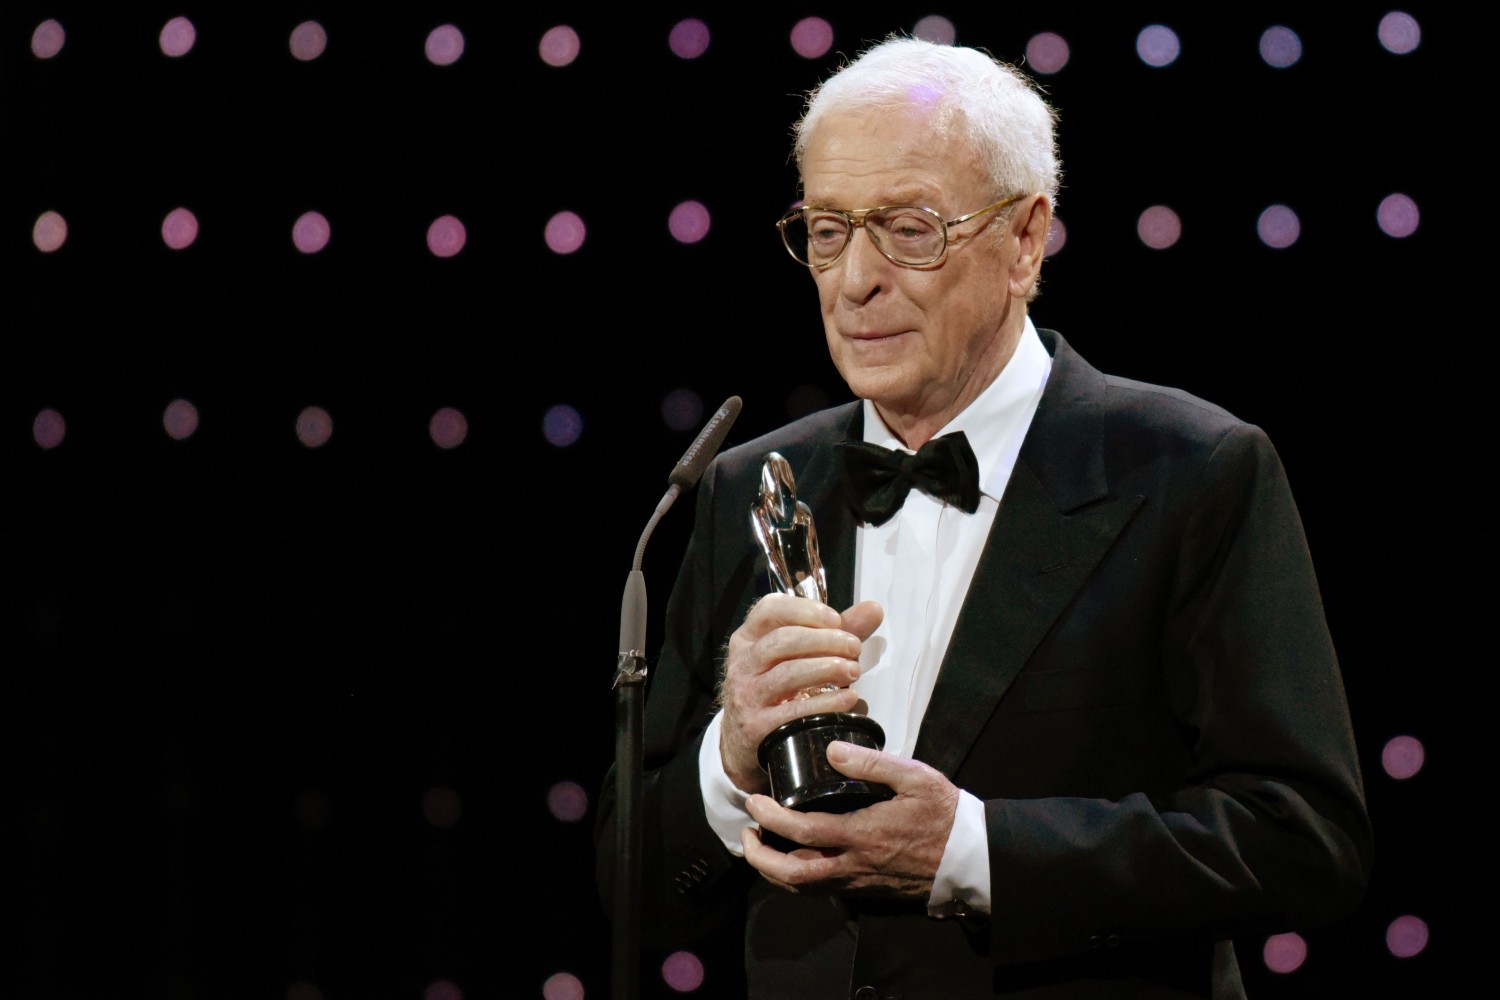 Michael Caine Announces Retirement From Acting - InsideHook